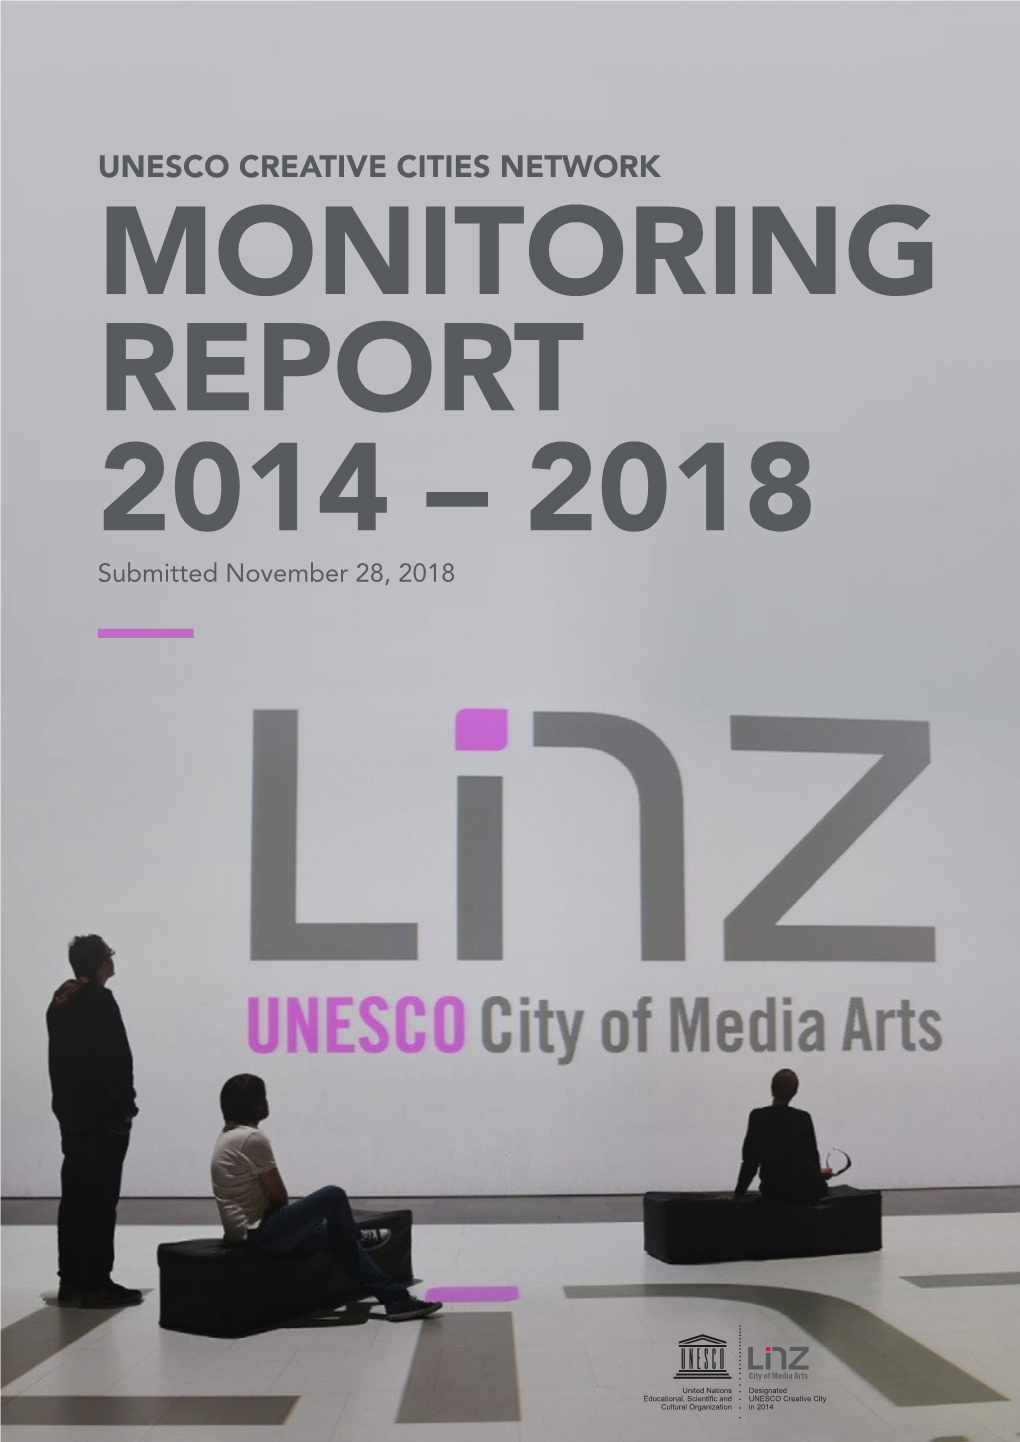 UNESCO CREATIVE CITIES NETWORK MONITORING REPORT 2014 – 2018 Submitted November 28, 2018 — Linz Lives Media Art CONTENTS